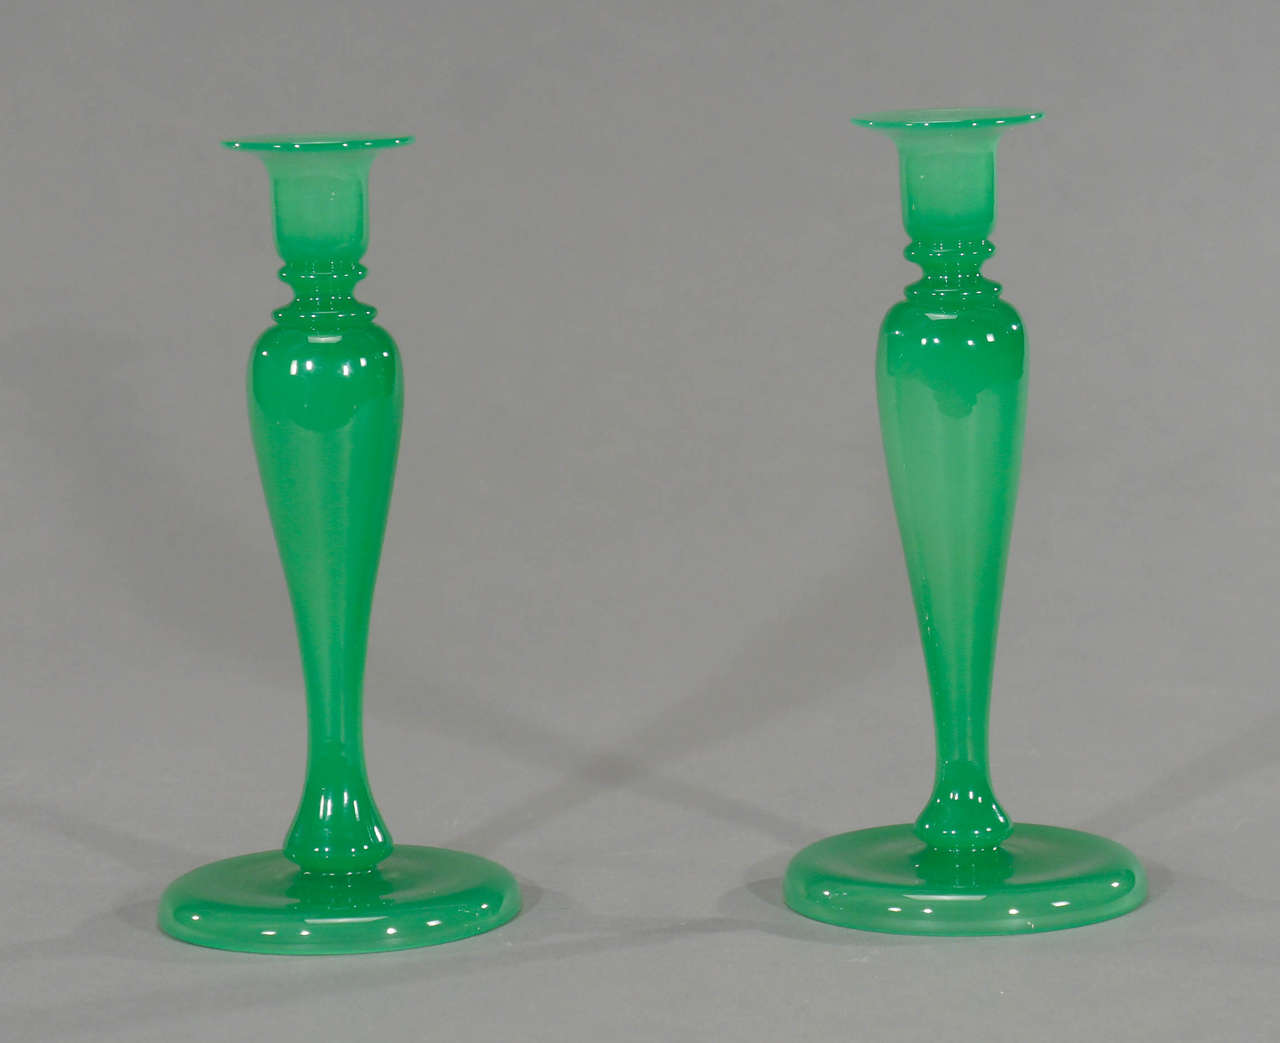 This wonderful pair of hand blown candlesticks was made by Stevens and Williams or Steuben in the transitional period while Frederick Carder was moving to Corning Glass Works to become the new director. The color is rich and deep and looks to be a